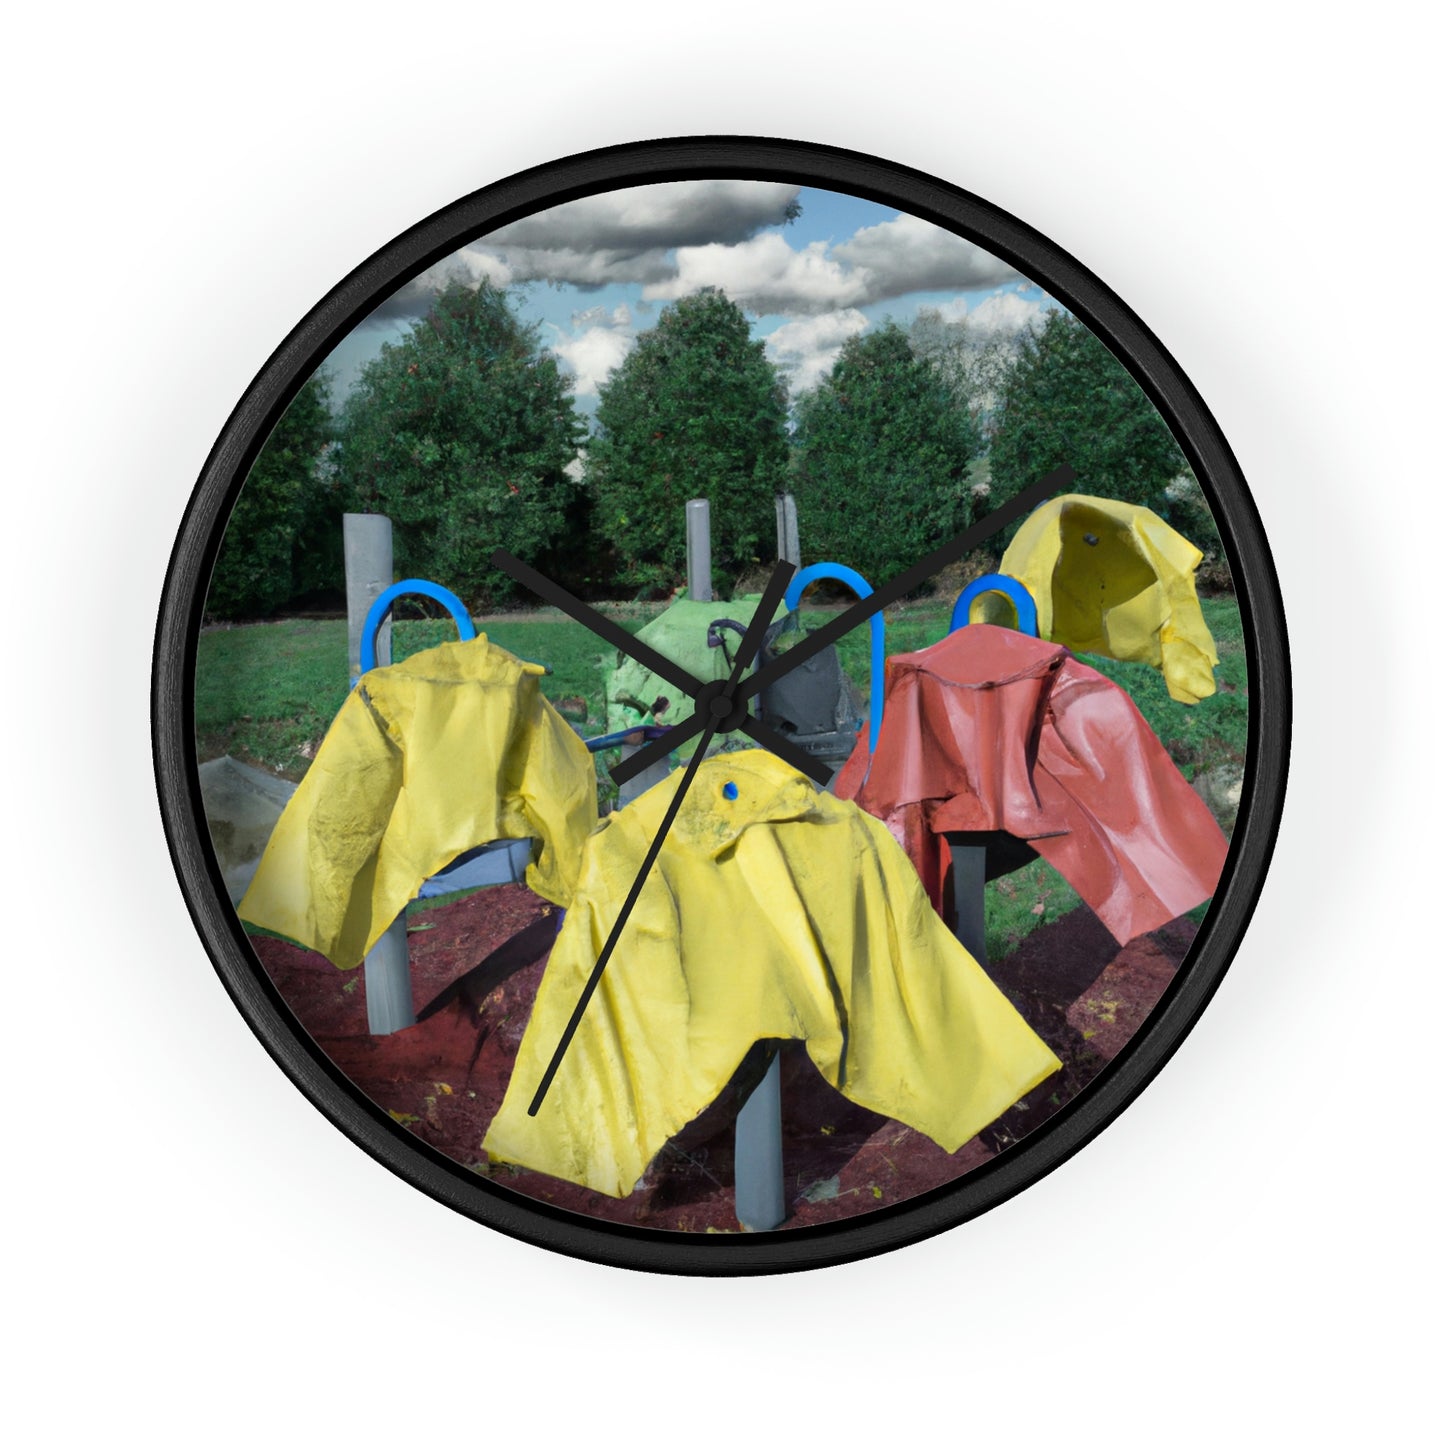 Empty Playground Blues: The Tale Of The Lost Rain Coats - The Alien Wall Clock